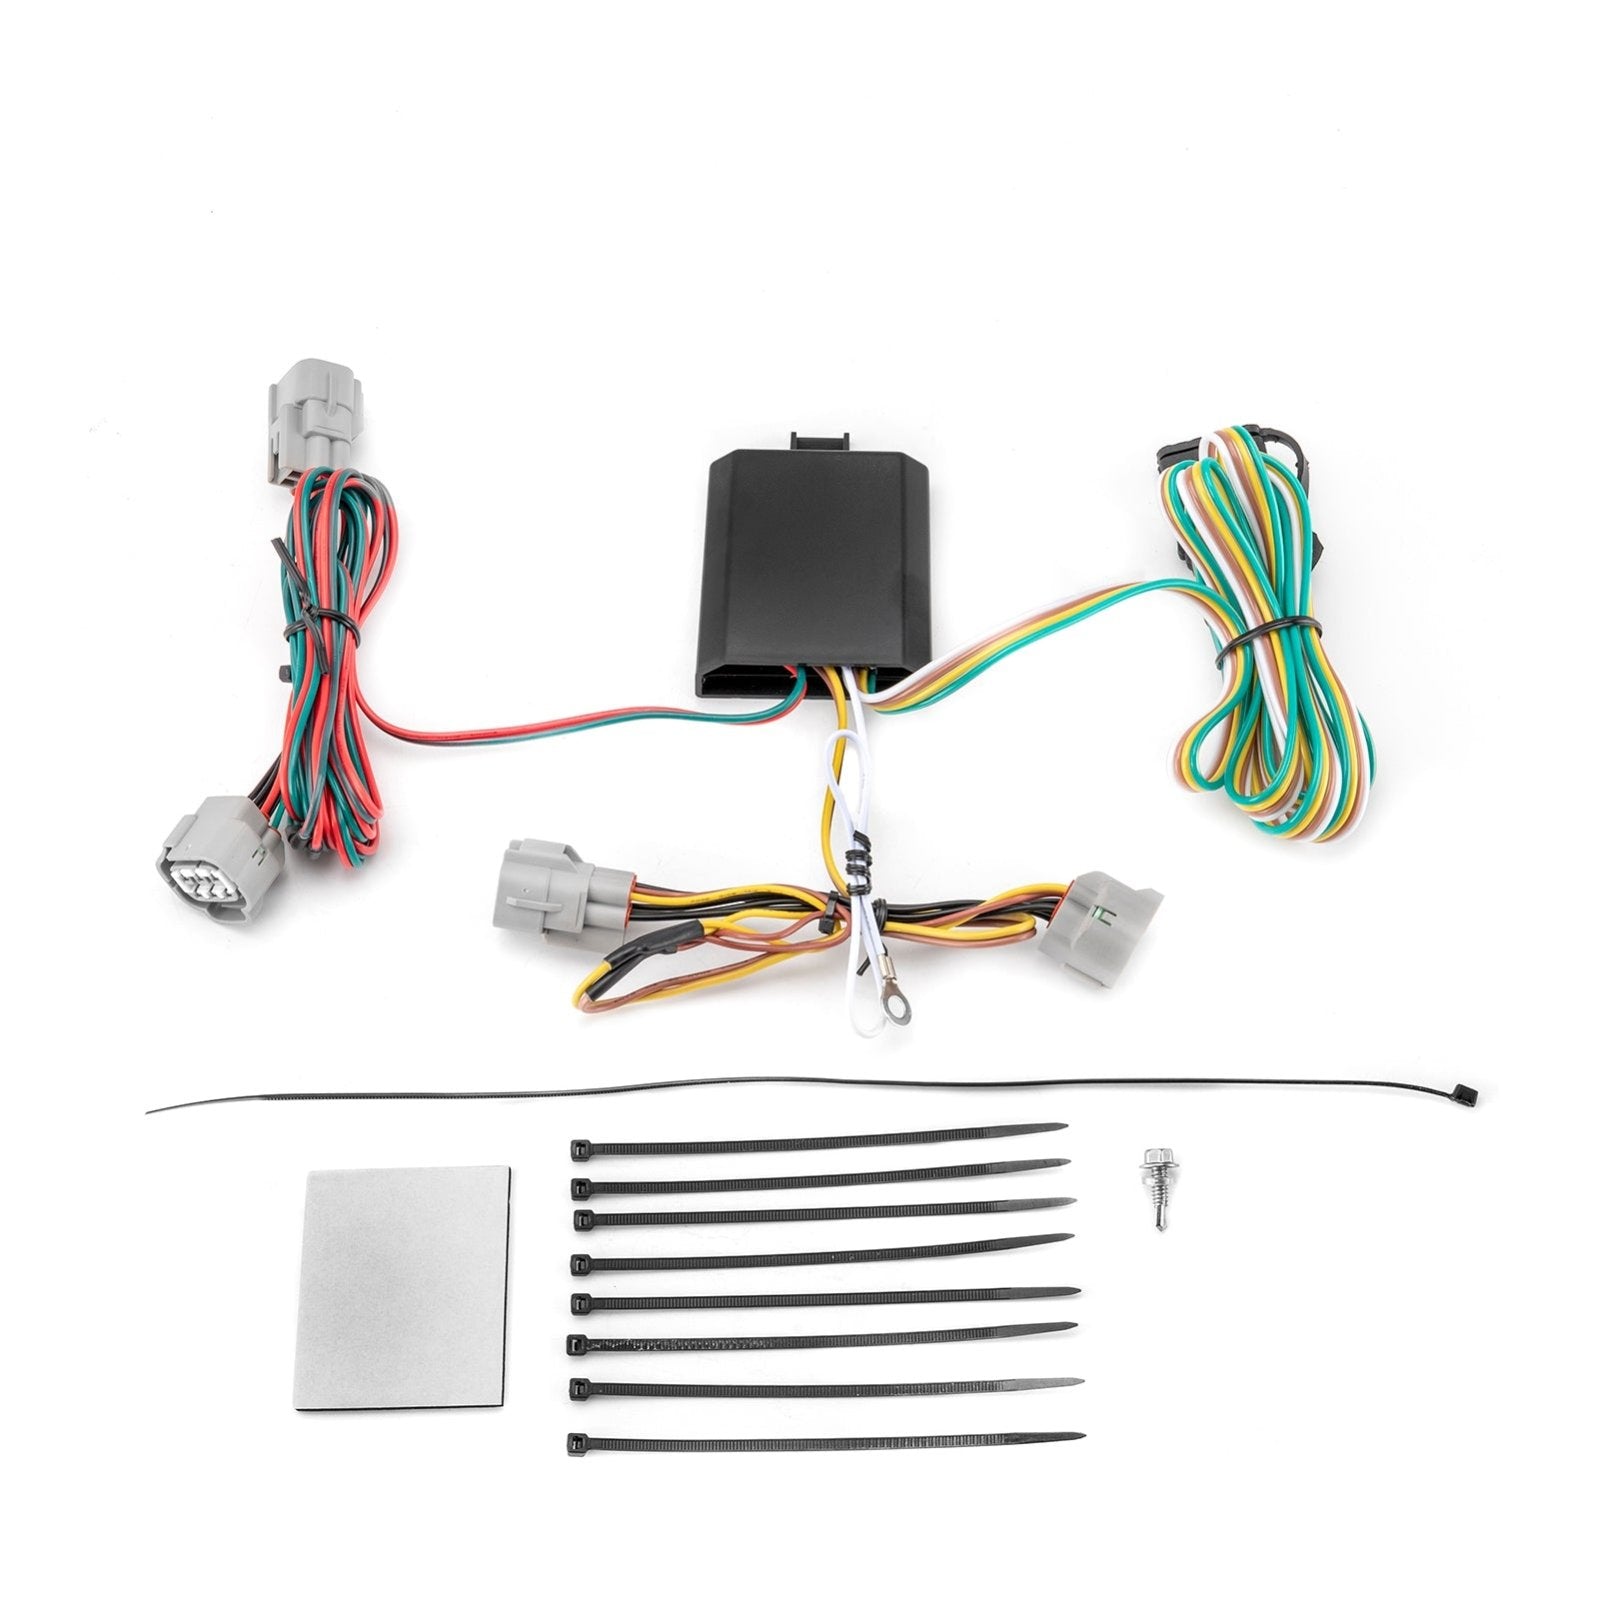 1993-2015 Toyota Tacoma T100 Hilux Vehicle-Side 4-Pin Trailer Wiring Harness w/ Plug & Play Connector - Weisen